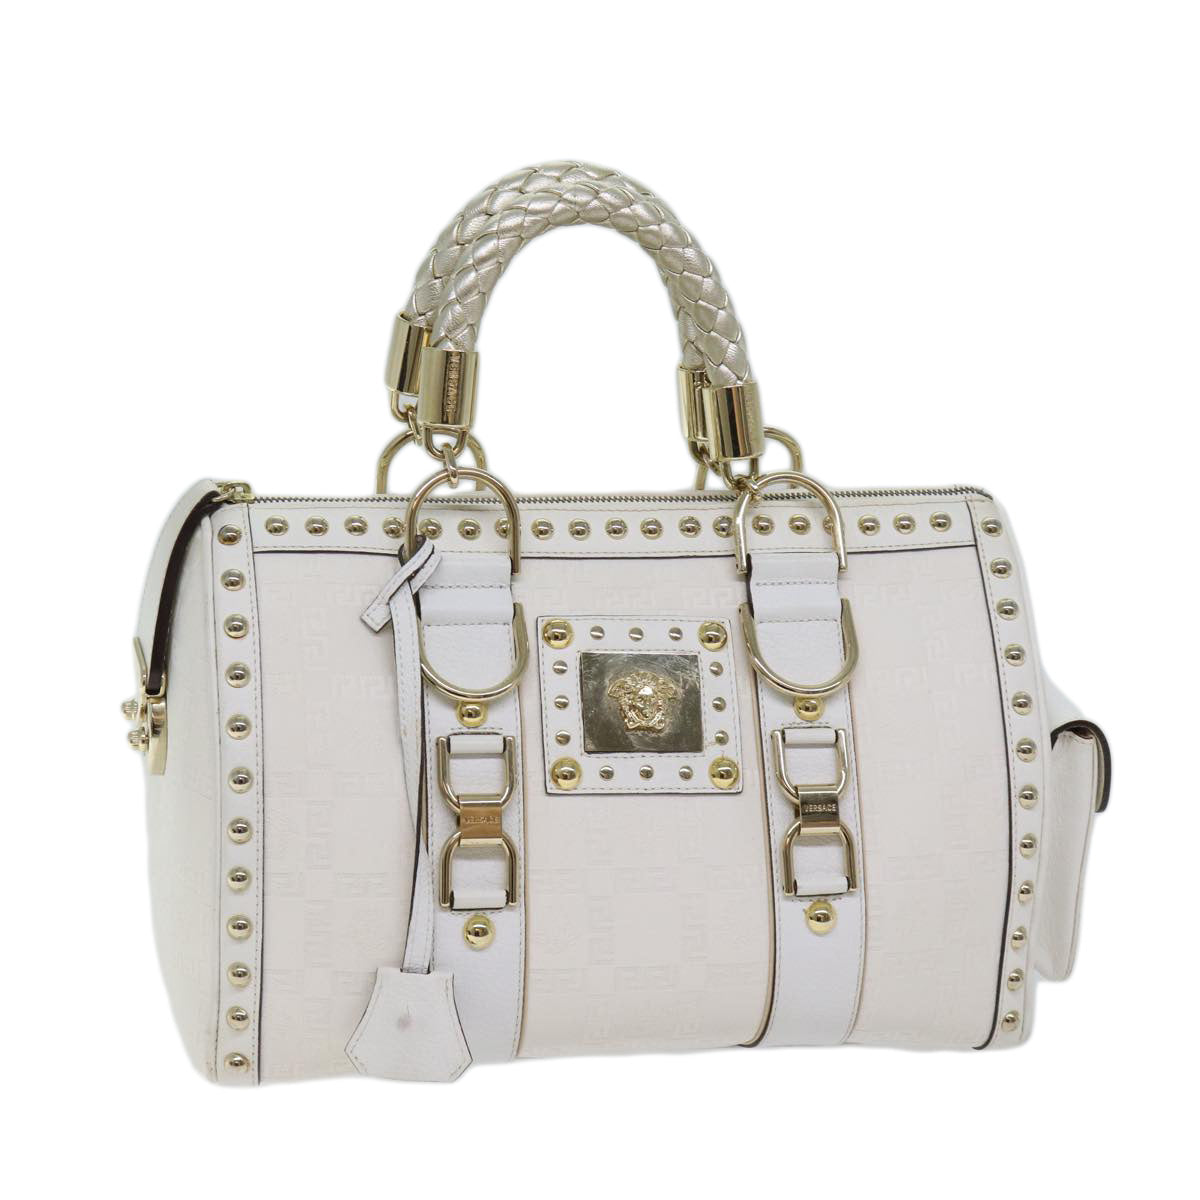 VERSACE Boston Bag Leather White Auth 70452A